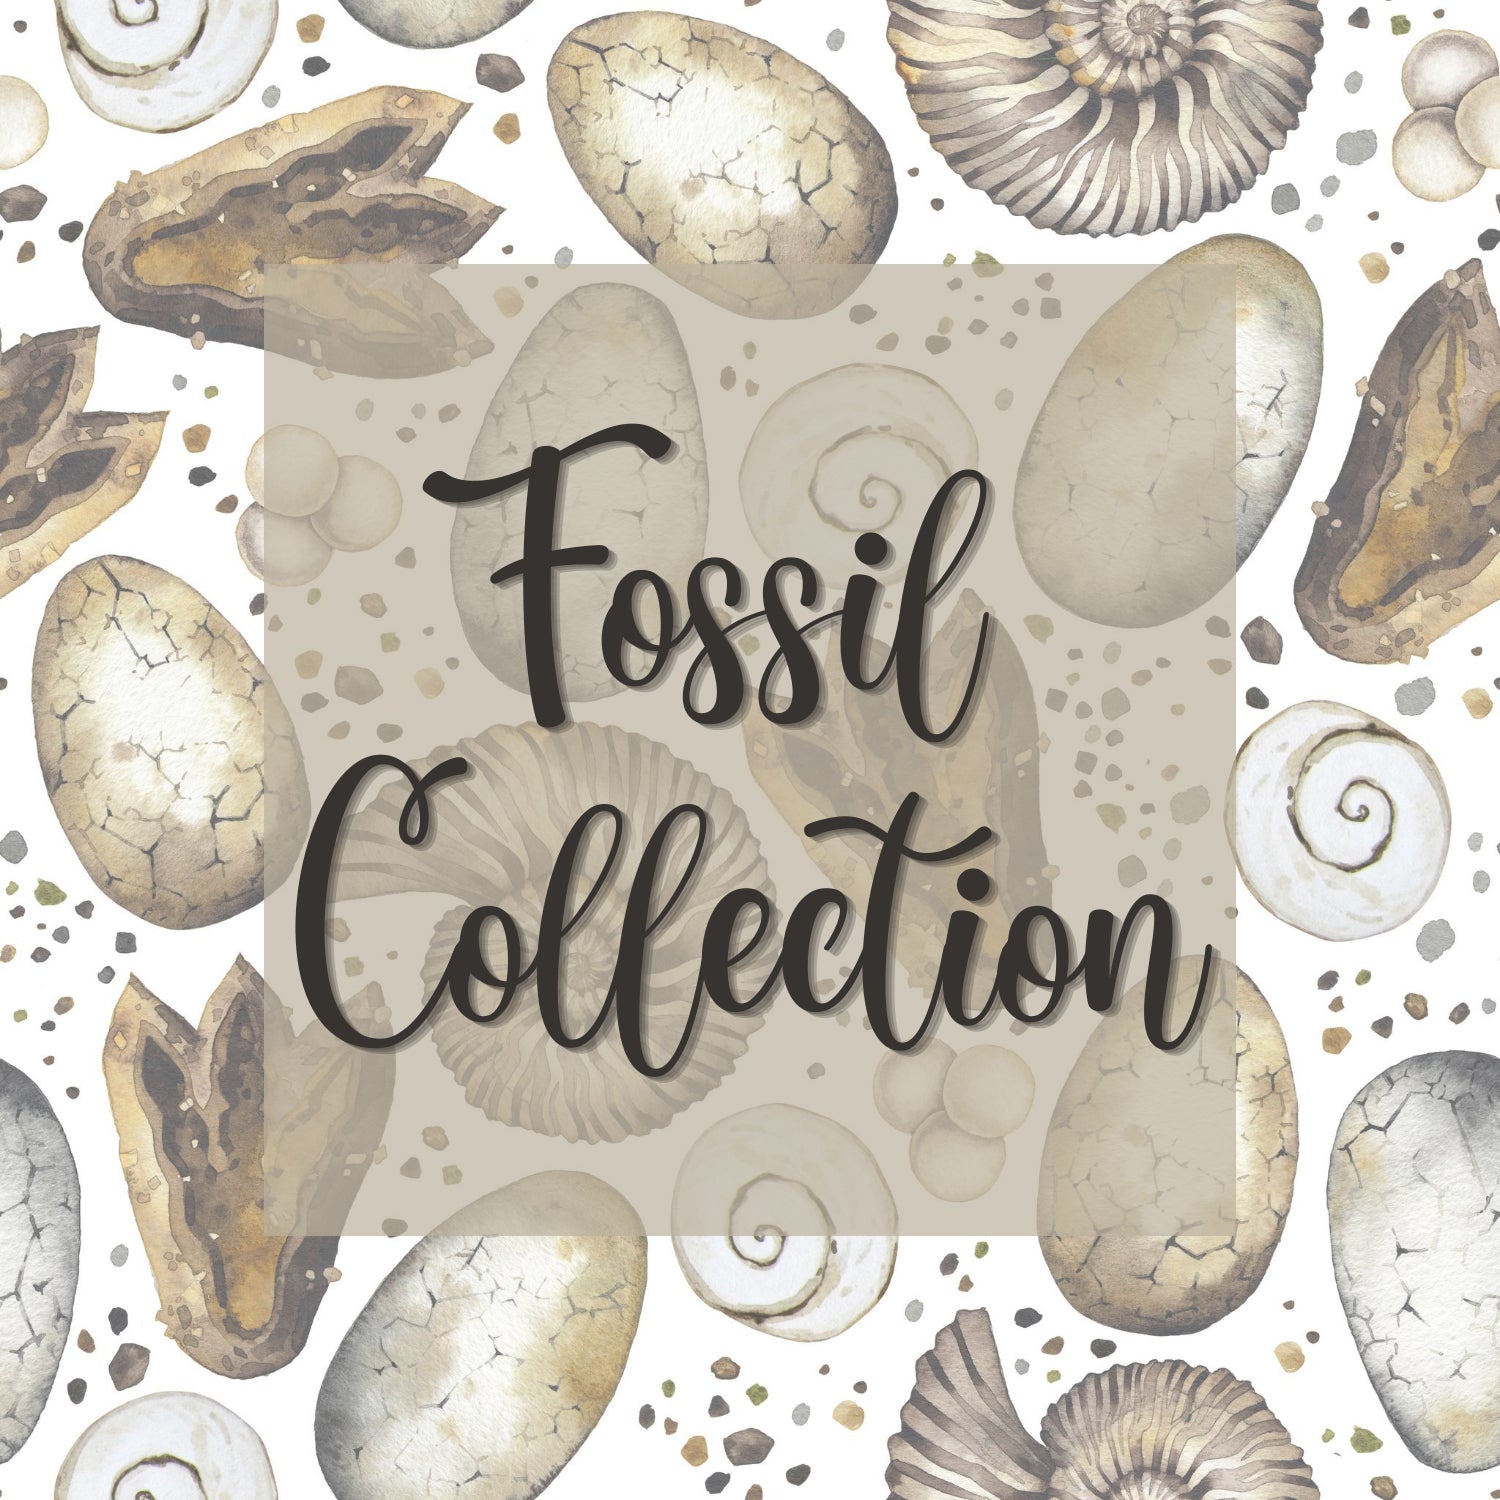 GeoFossils Fossil collection image